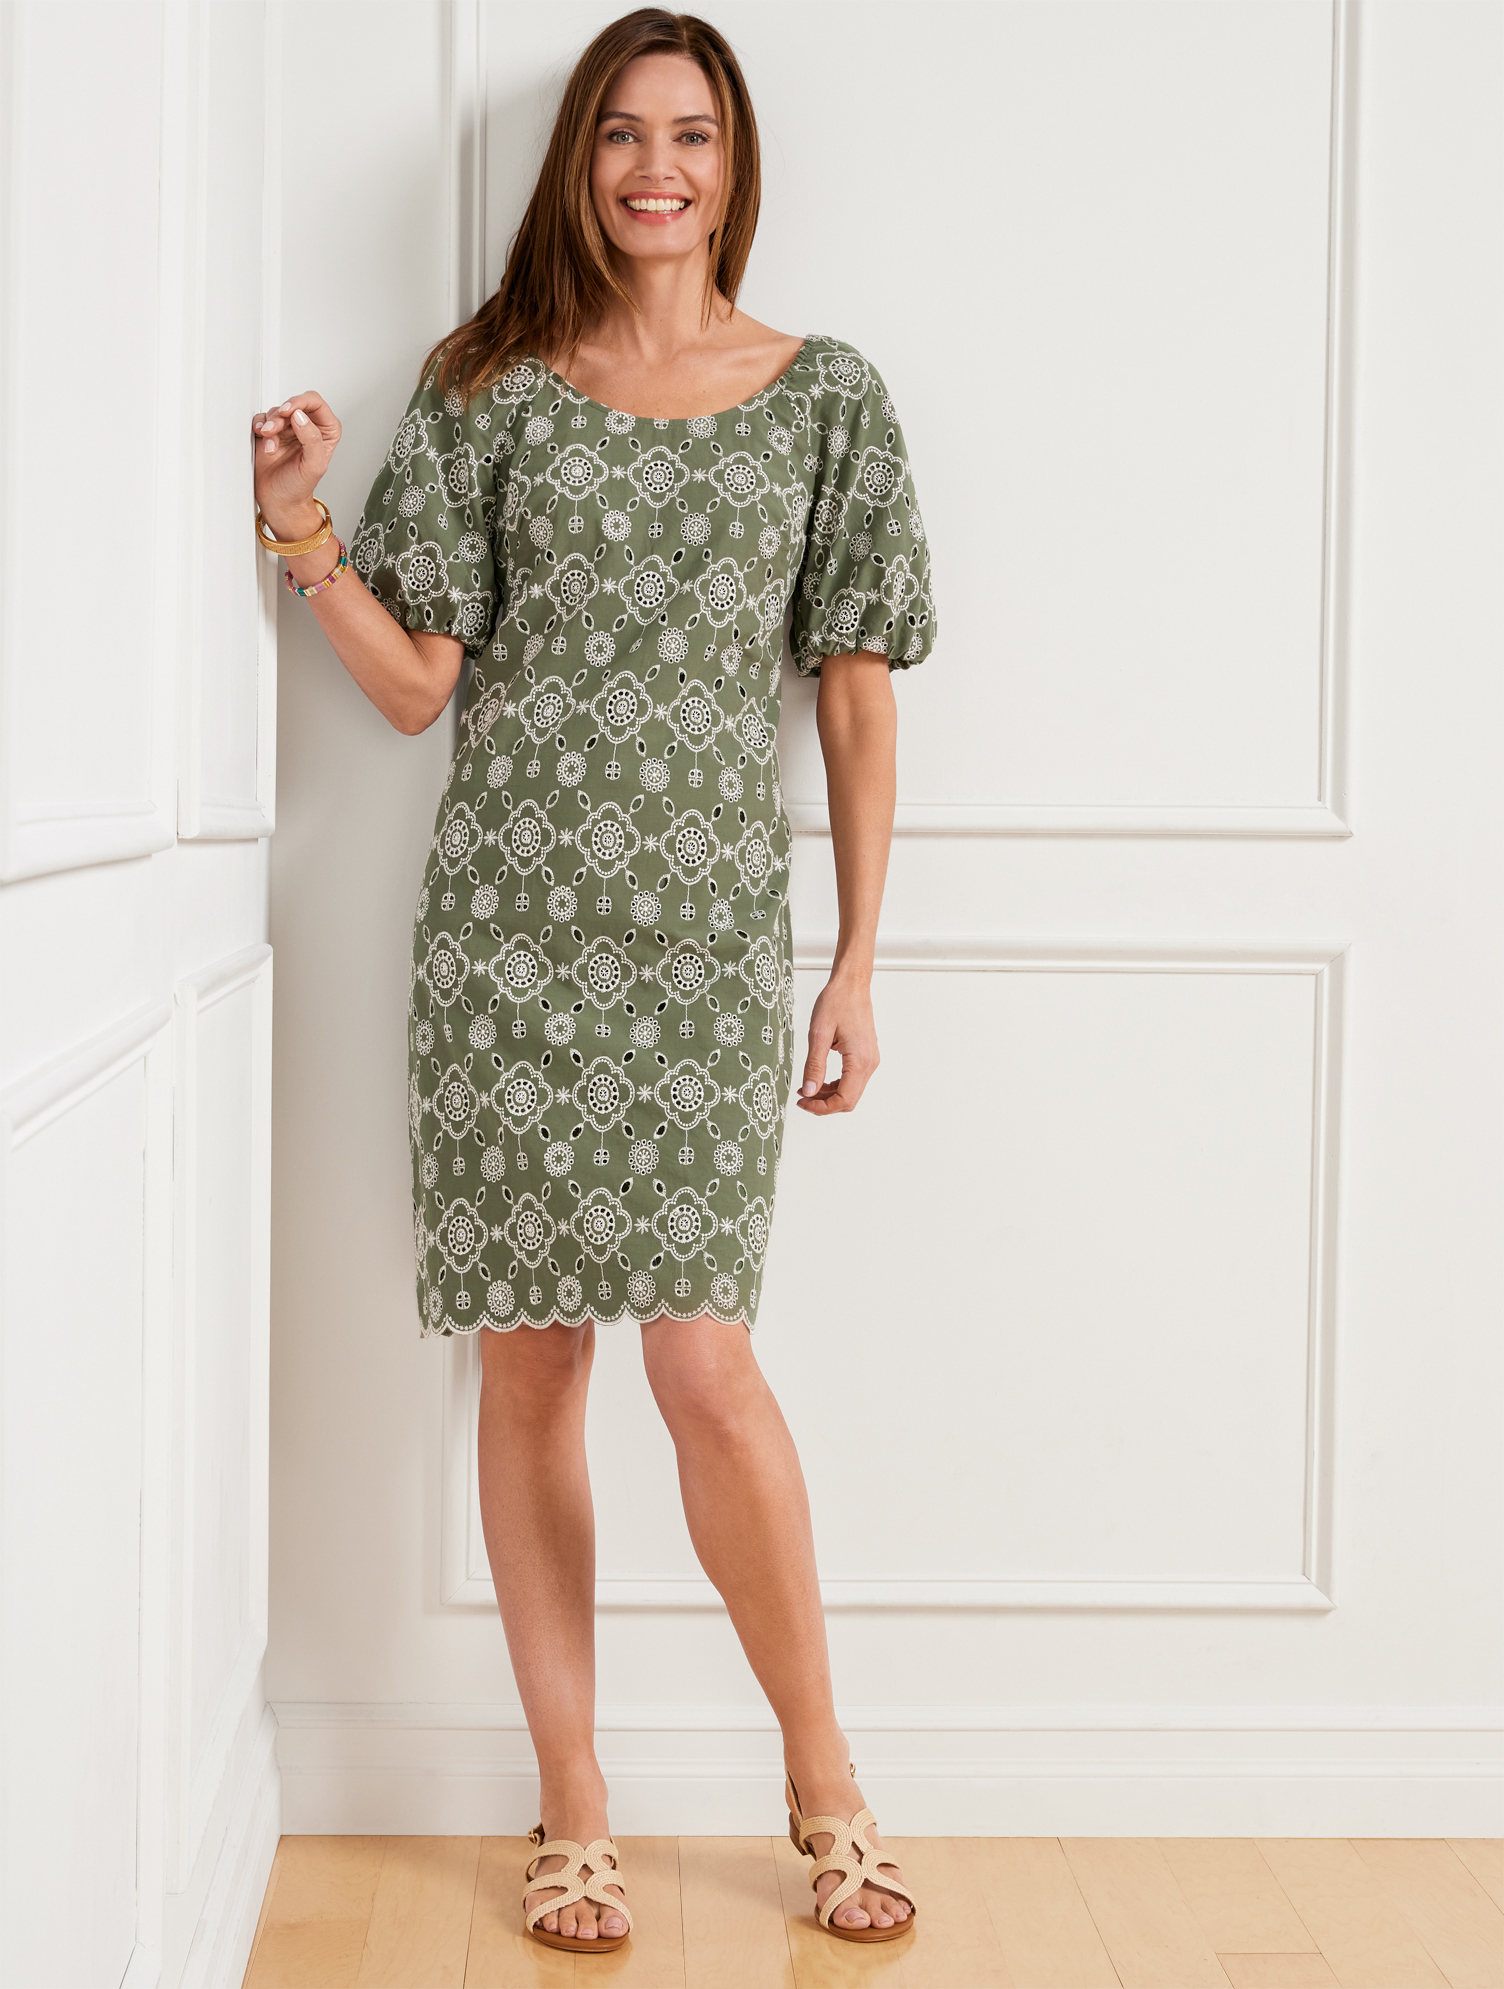 Talbots Puff Sleeve Embroidered Shift Dress - Spring Moss/white - 4 - 100% Cotton  In Spring Moss,white